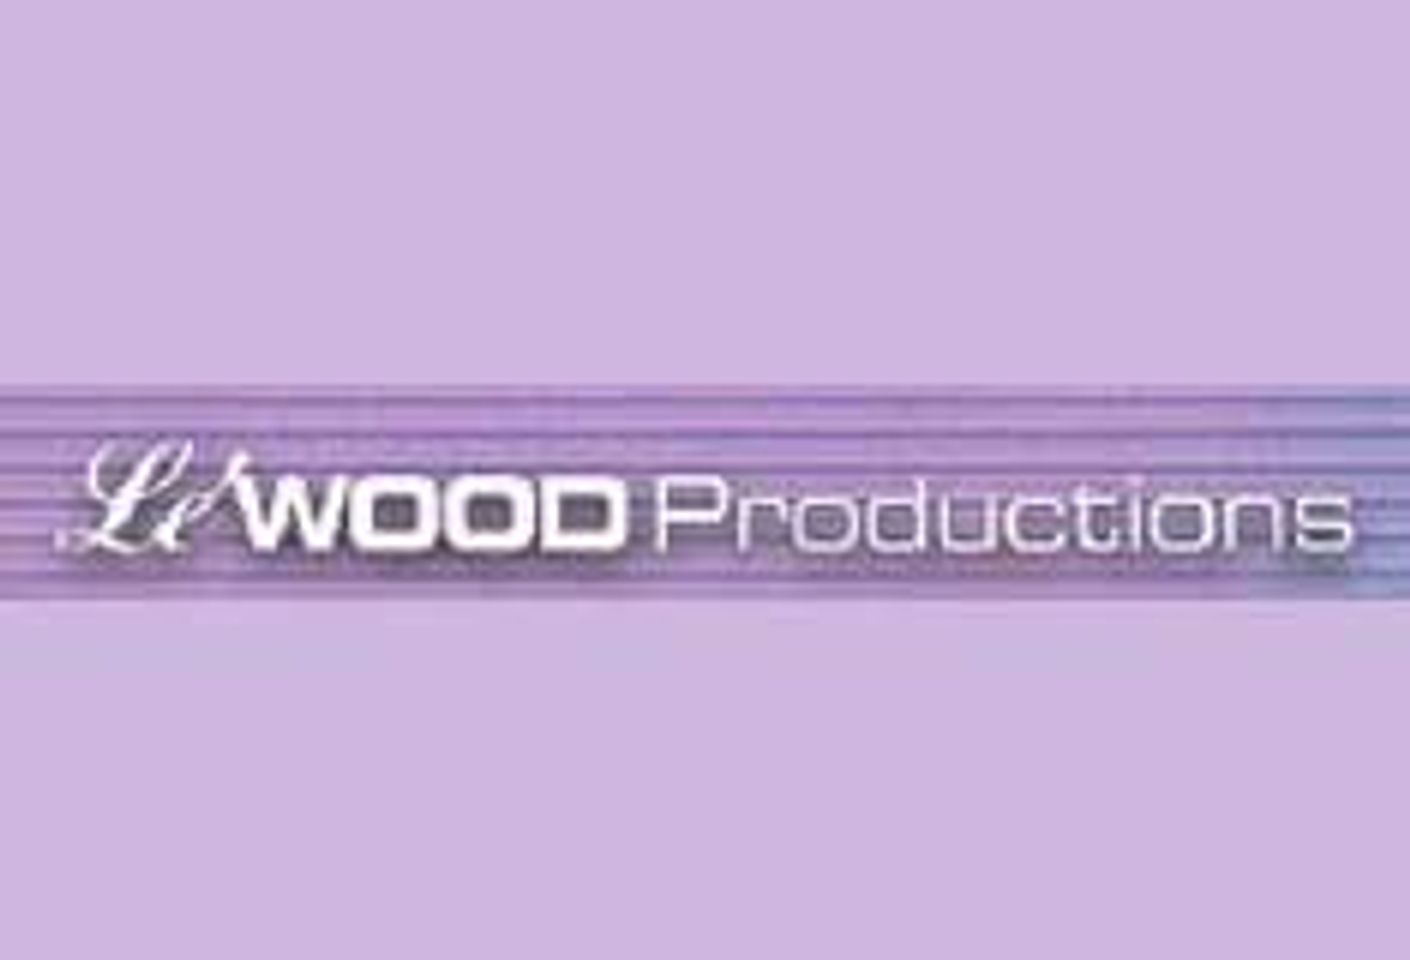 LeWood Productions’ Husband/Wife Duo Garner Diverse AVN Nominations